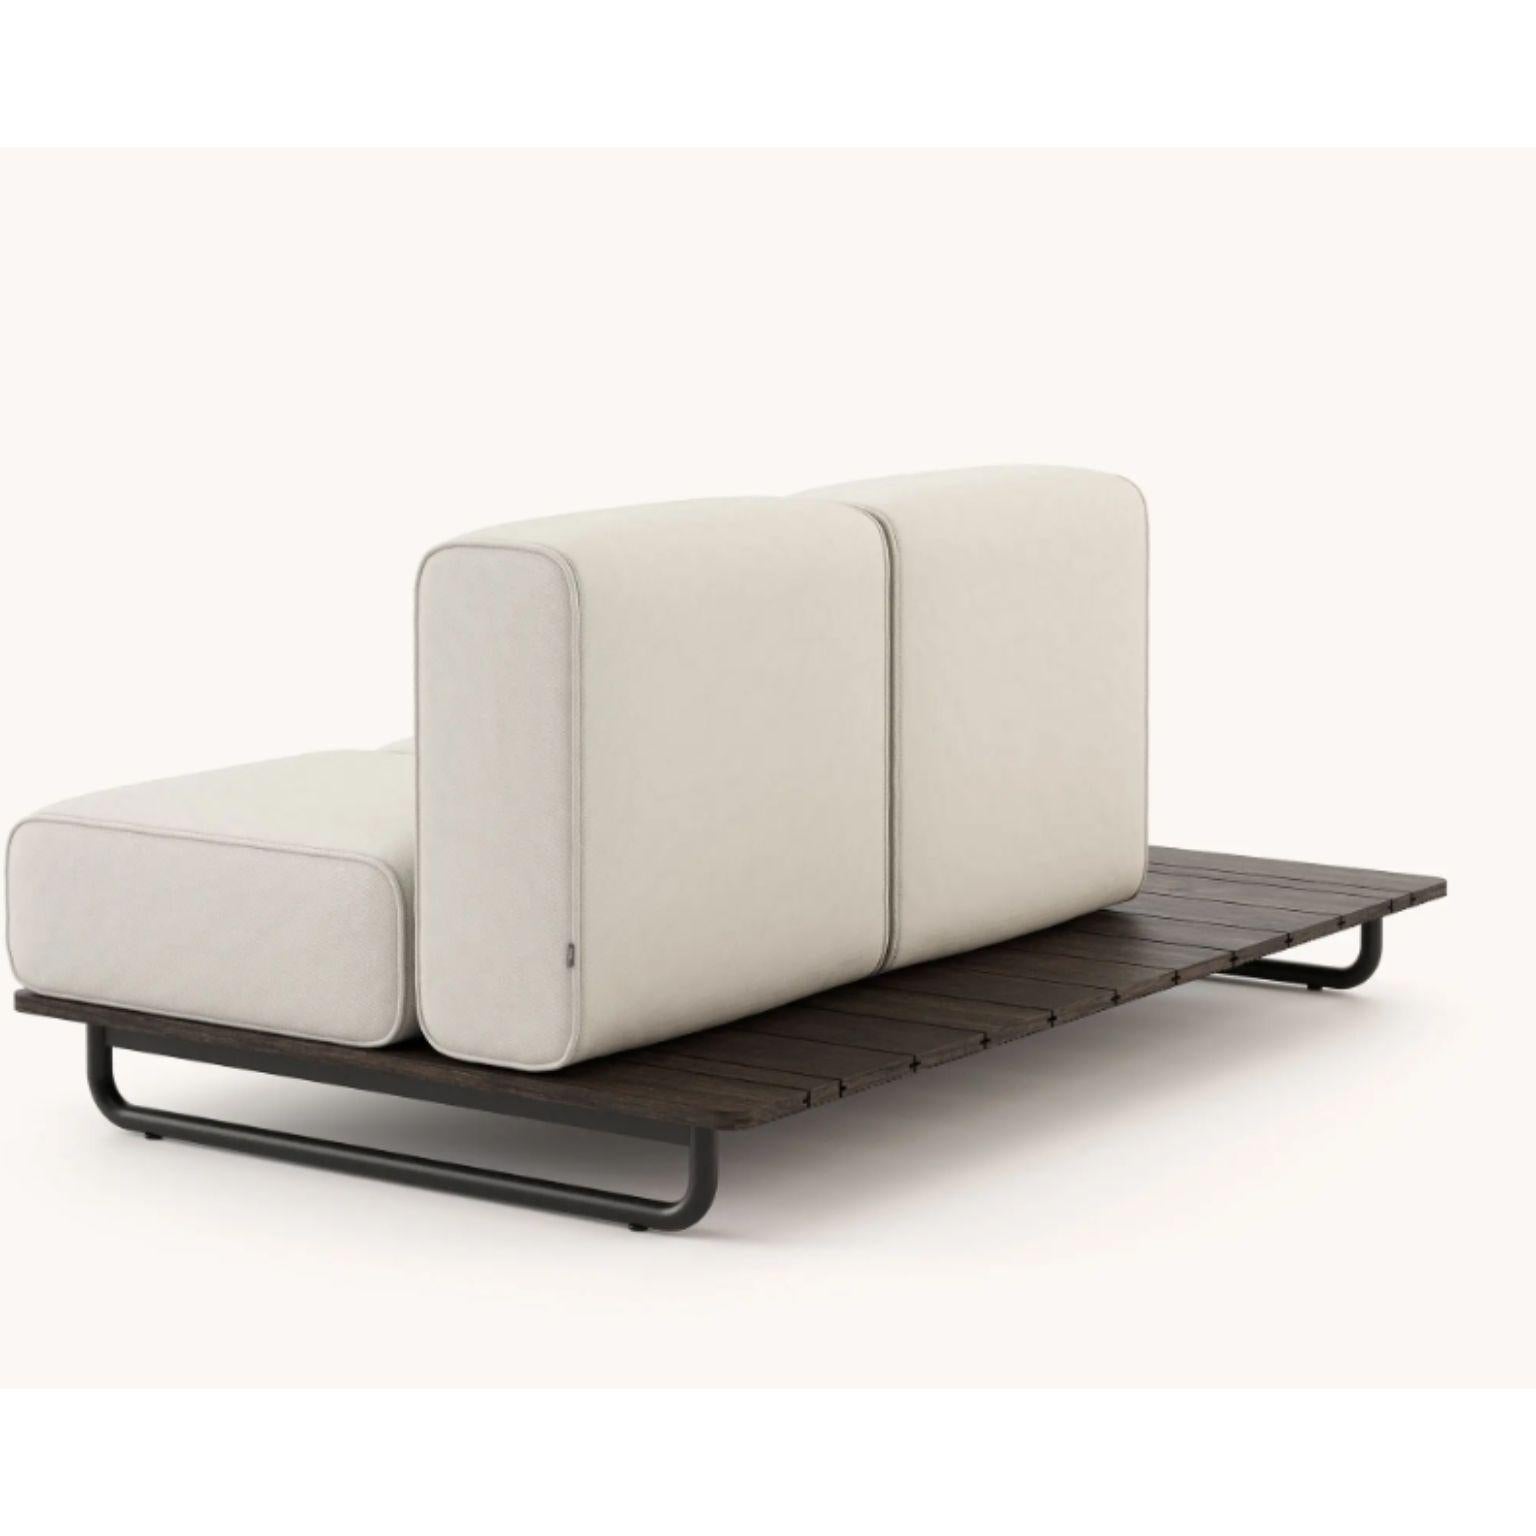 Post-Modern Copacabana Sofa Without Armrest by Domkapa For Sale